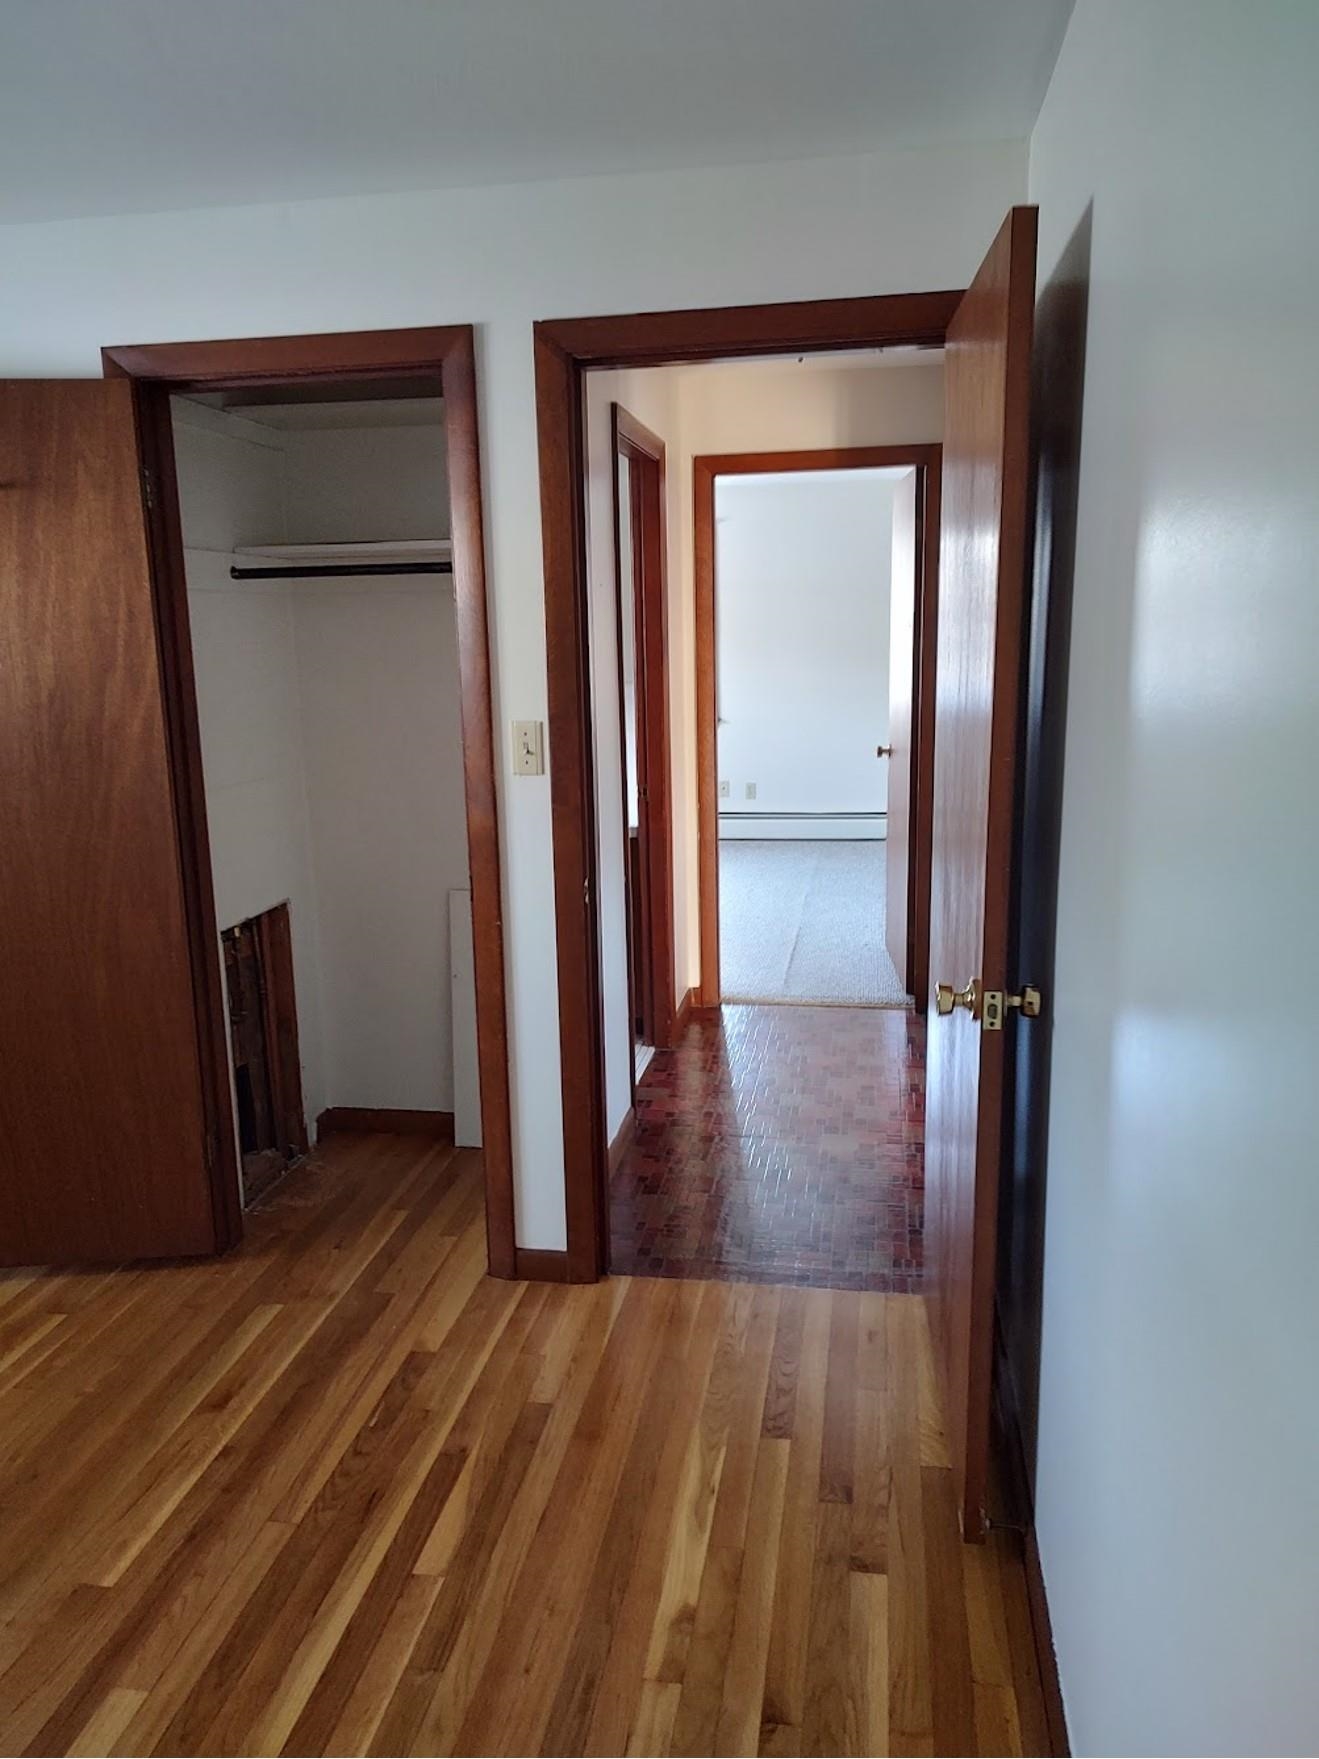 2 Bedrooms (upstairs unit B)